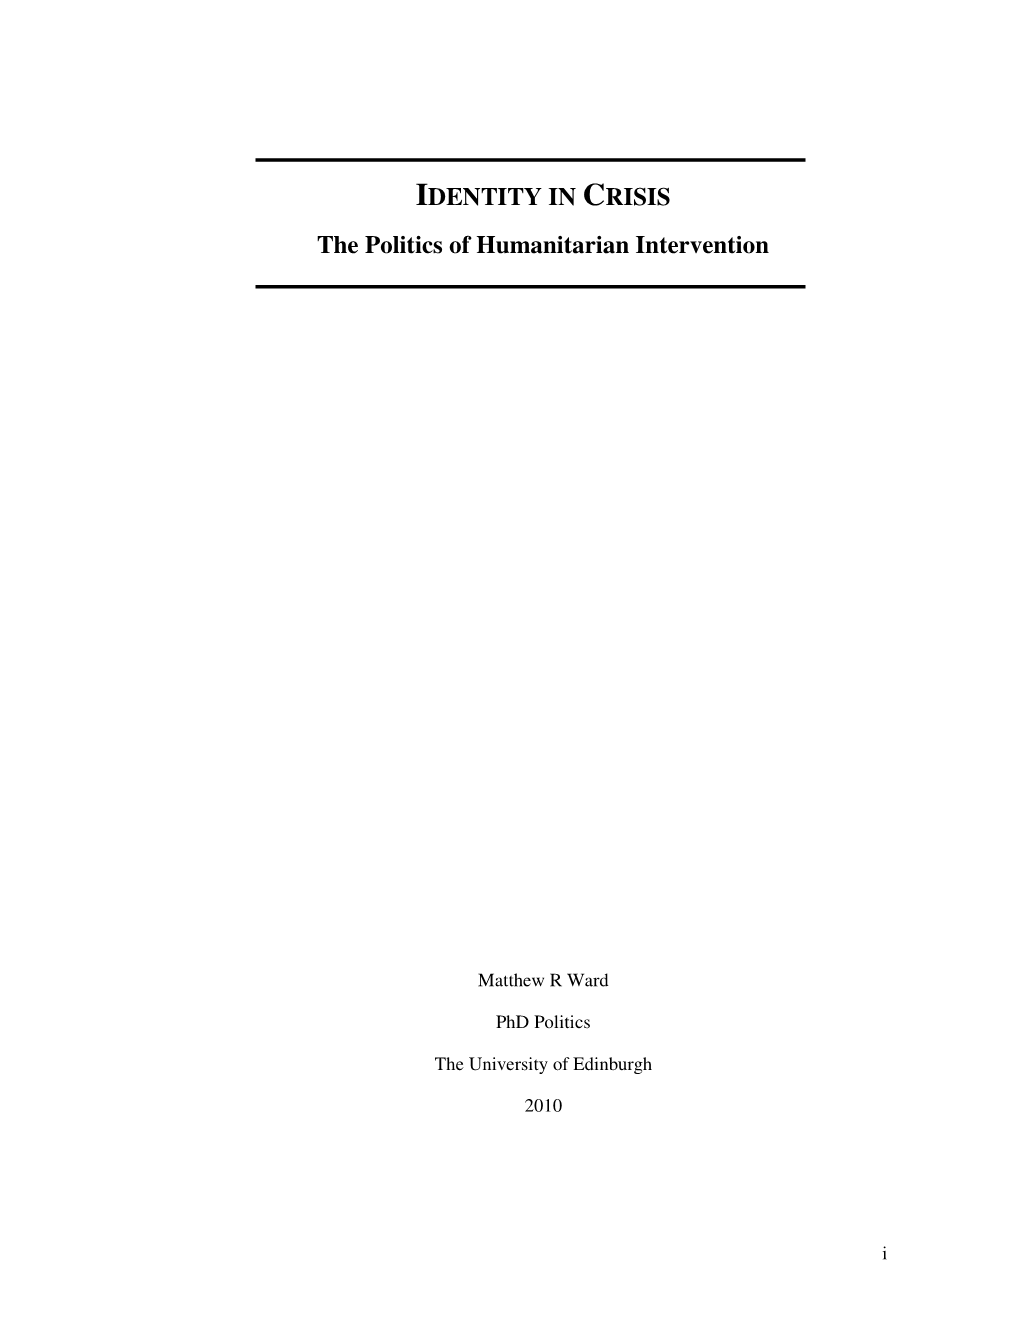 IDENTITY in CRISIS the Politics of Humanitarian Intervention